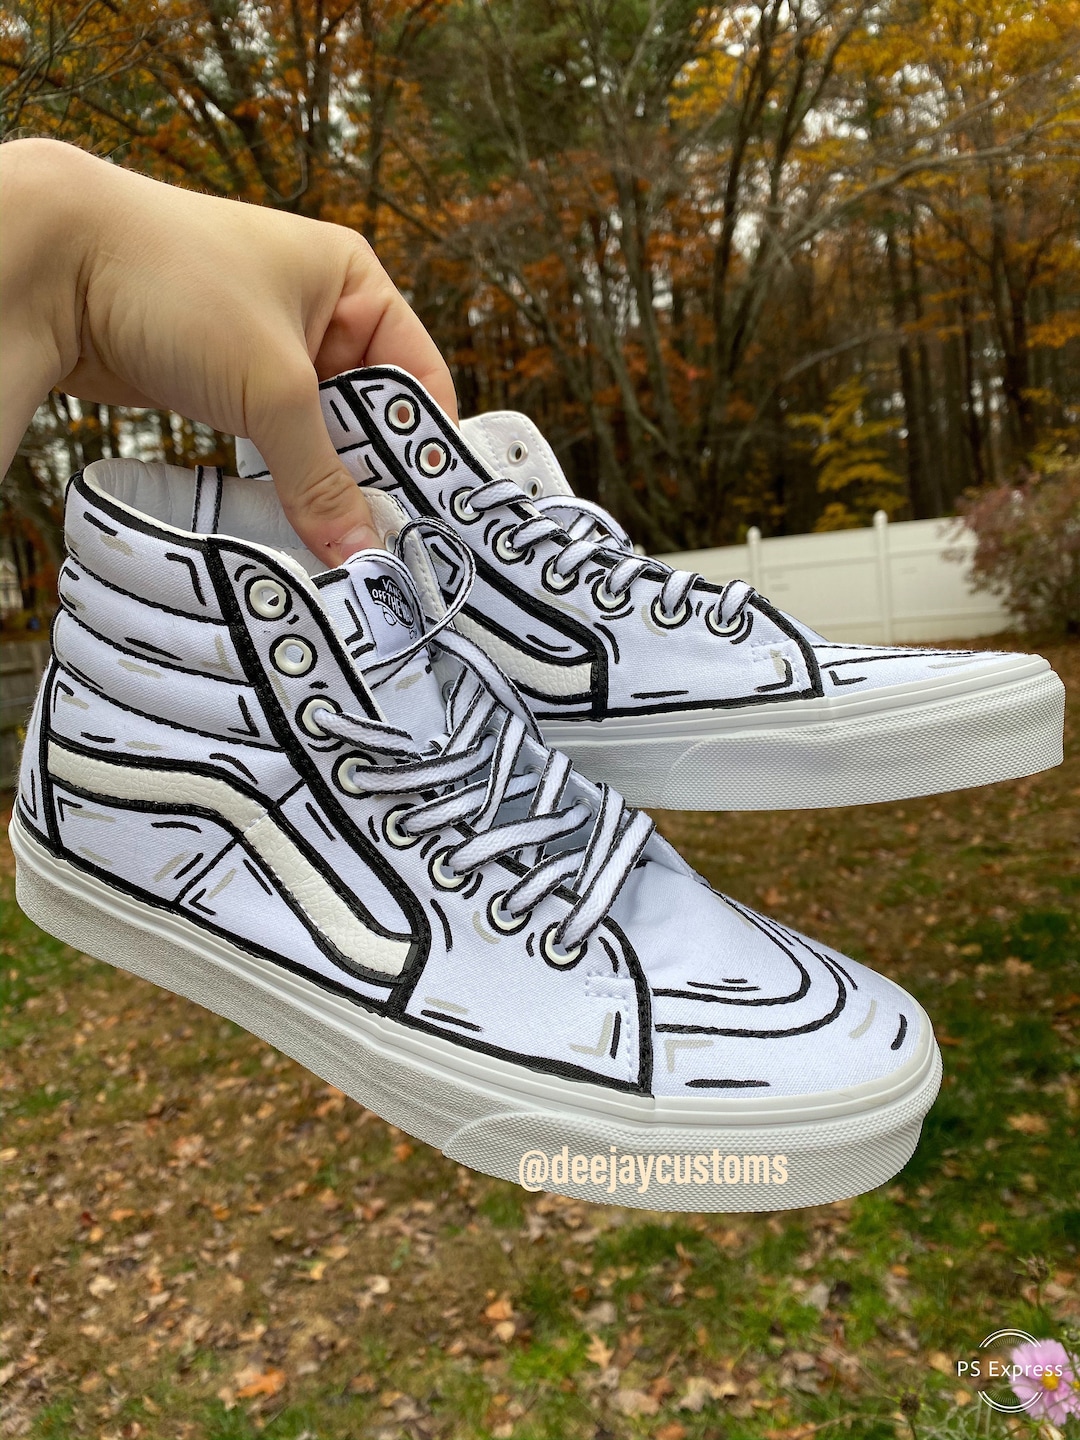 The Coolest Vans Sneakers and Custom Shoes on the Internet